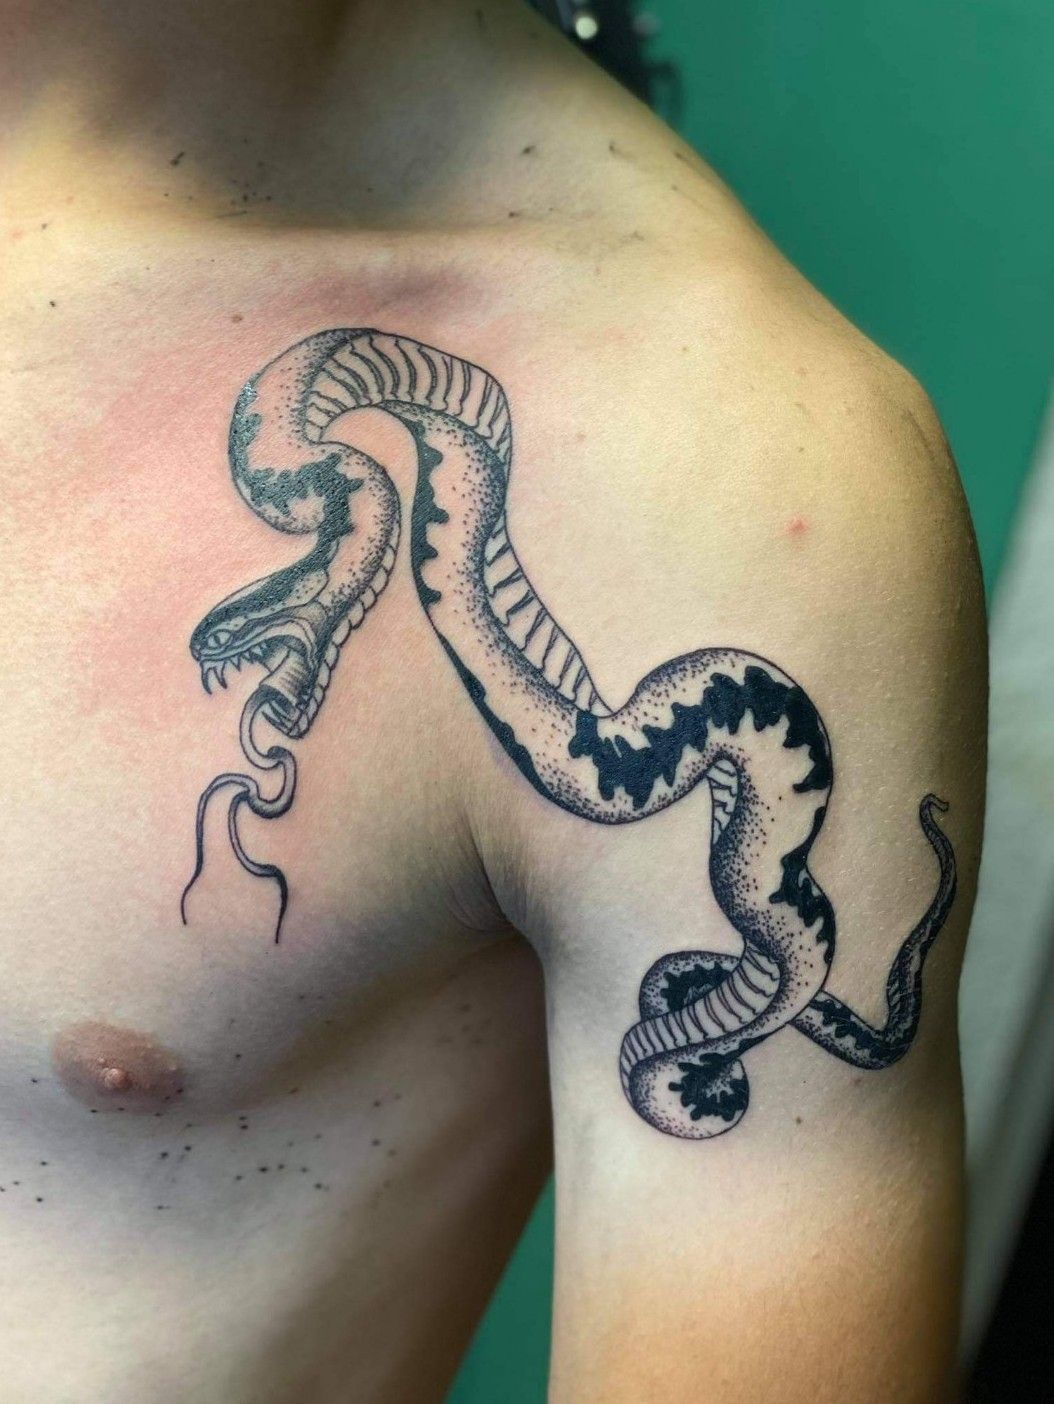 Large snake skeleton tattoo located on the upper arm | Hand tattoos, Snake  tattoo design, Skeleton tattoos